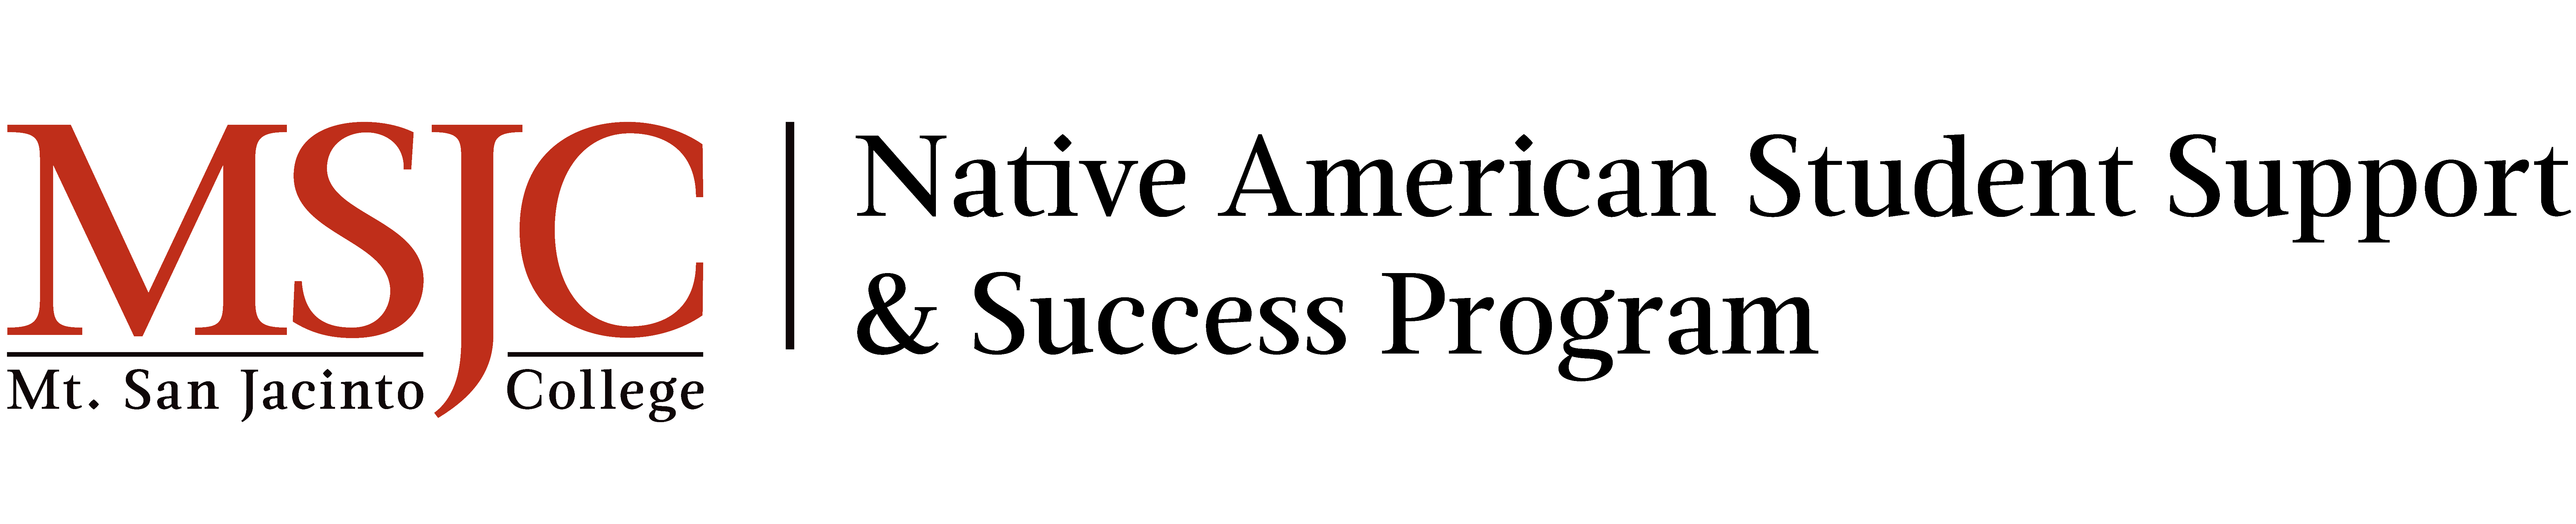 Native American Student Support and Success Program